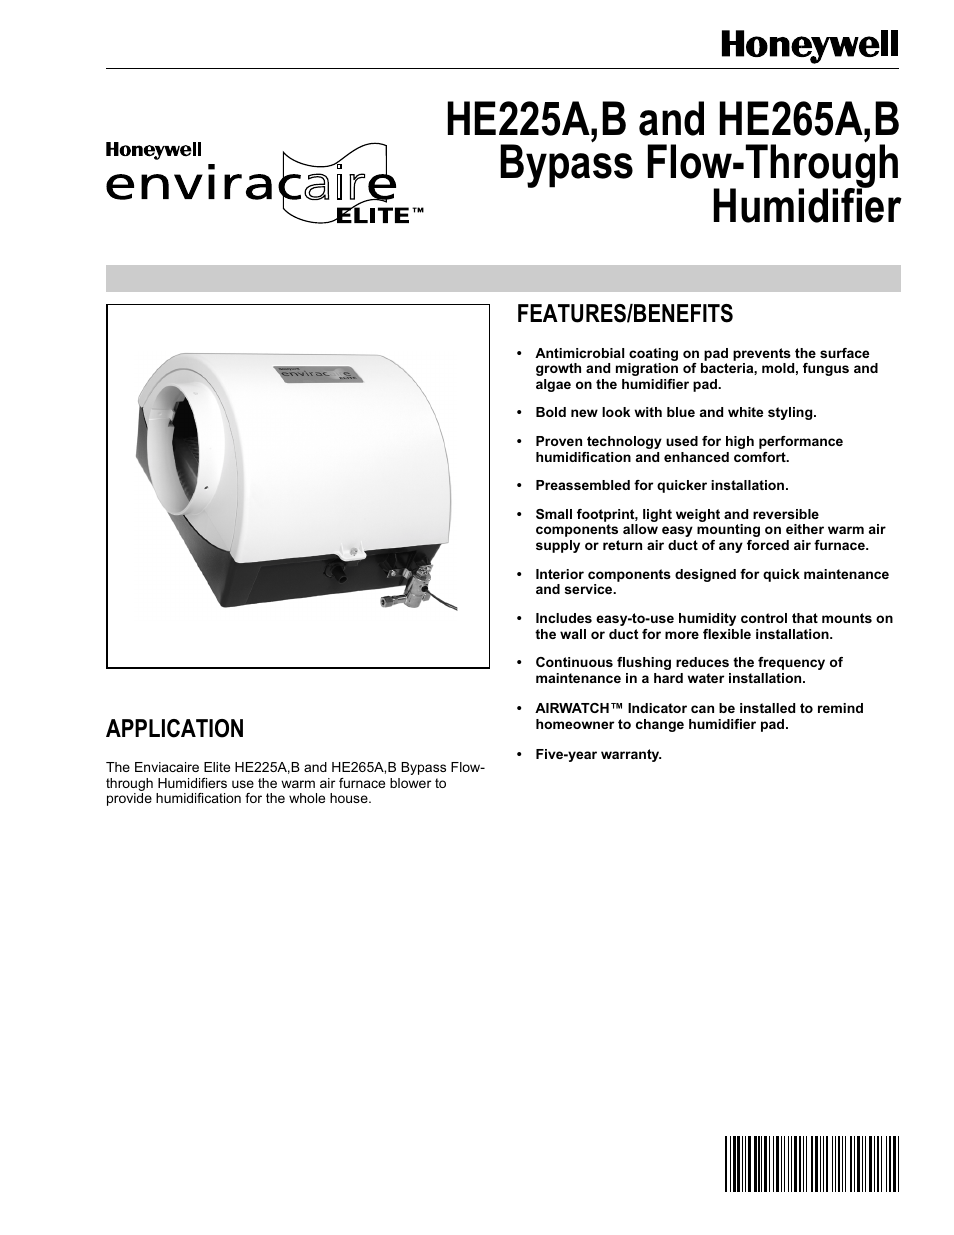 Honeywell Enviracare Elite Bypass Flow-Through Humidifier B User Manual | 12 pages